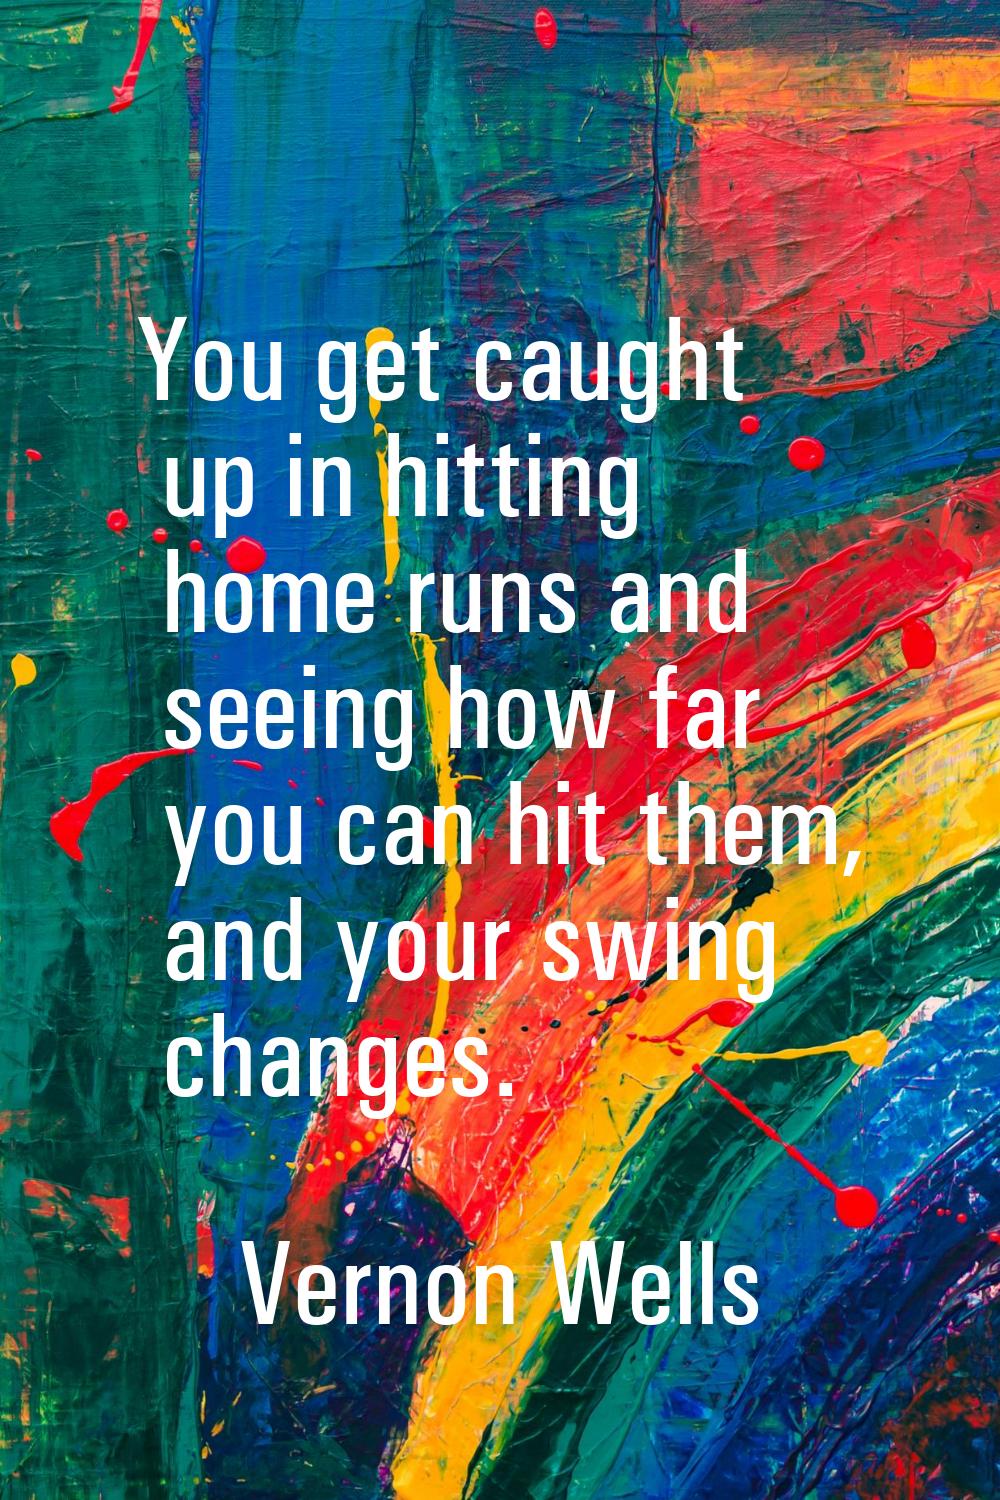 You get caught up in hitting home runs and seeing how far you can hit them, and your swing changes.